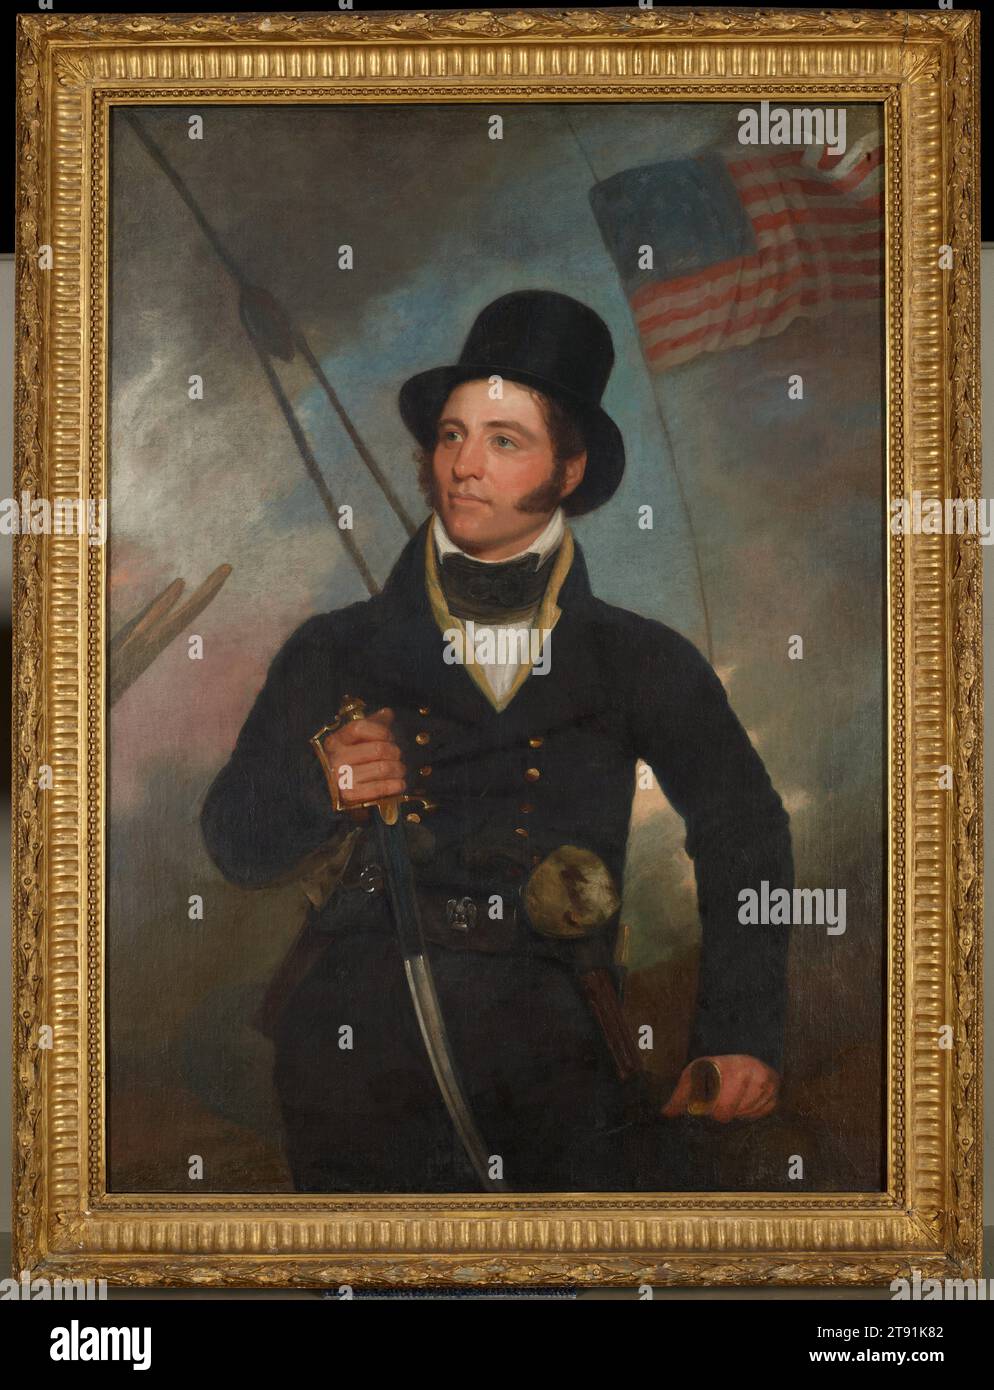 Portrait of Captain Samuel Chester Reid, 1815, John Wesley Jarvis, American, 1780–1839, 50 1/2 x 36 3/8 in. (128.27 x 92.39 cm) (canvas)58 7/8 x 44 5/8 x 4 in. (149.54 x 113.35 x 10.16 cm) (outer frame), Oil on canvas, United States, 19th century, Captain Samuel Reid was one of the heroes of the War of 1812, defeating the British in 1814 and saving New Orleans from British conquest. In 1817, two years after this portrait was painted, Reid designed the present pattern of the American flag of stars and bars, with thirteen stripes representing the original American colonies Stock Photo